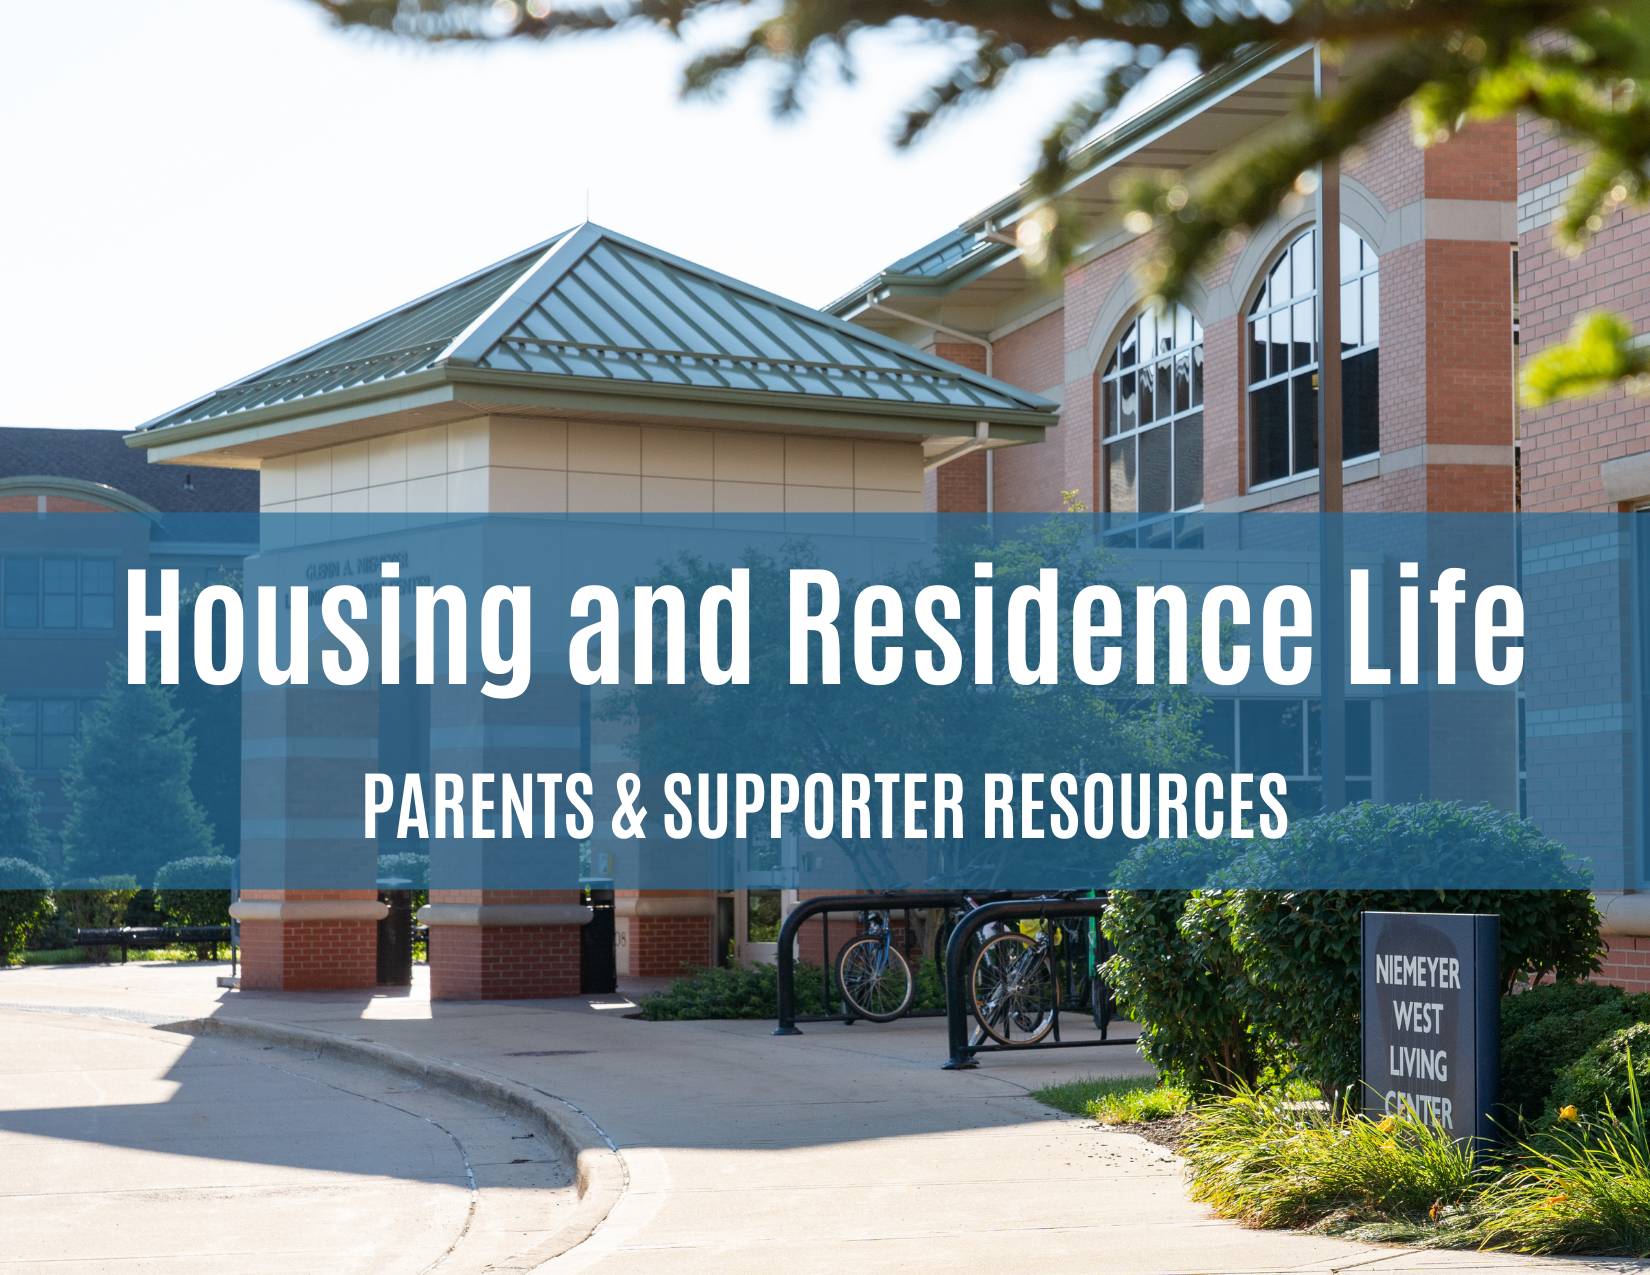 Housing and Residence Life; Parents and Supporter Resources